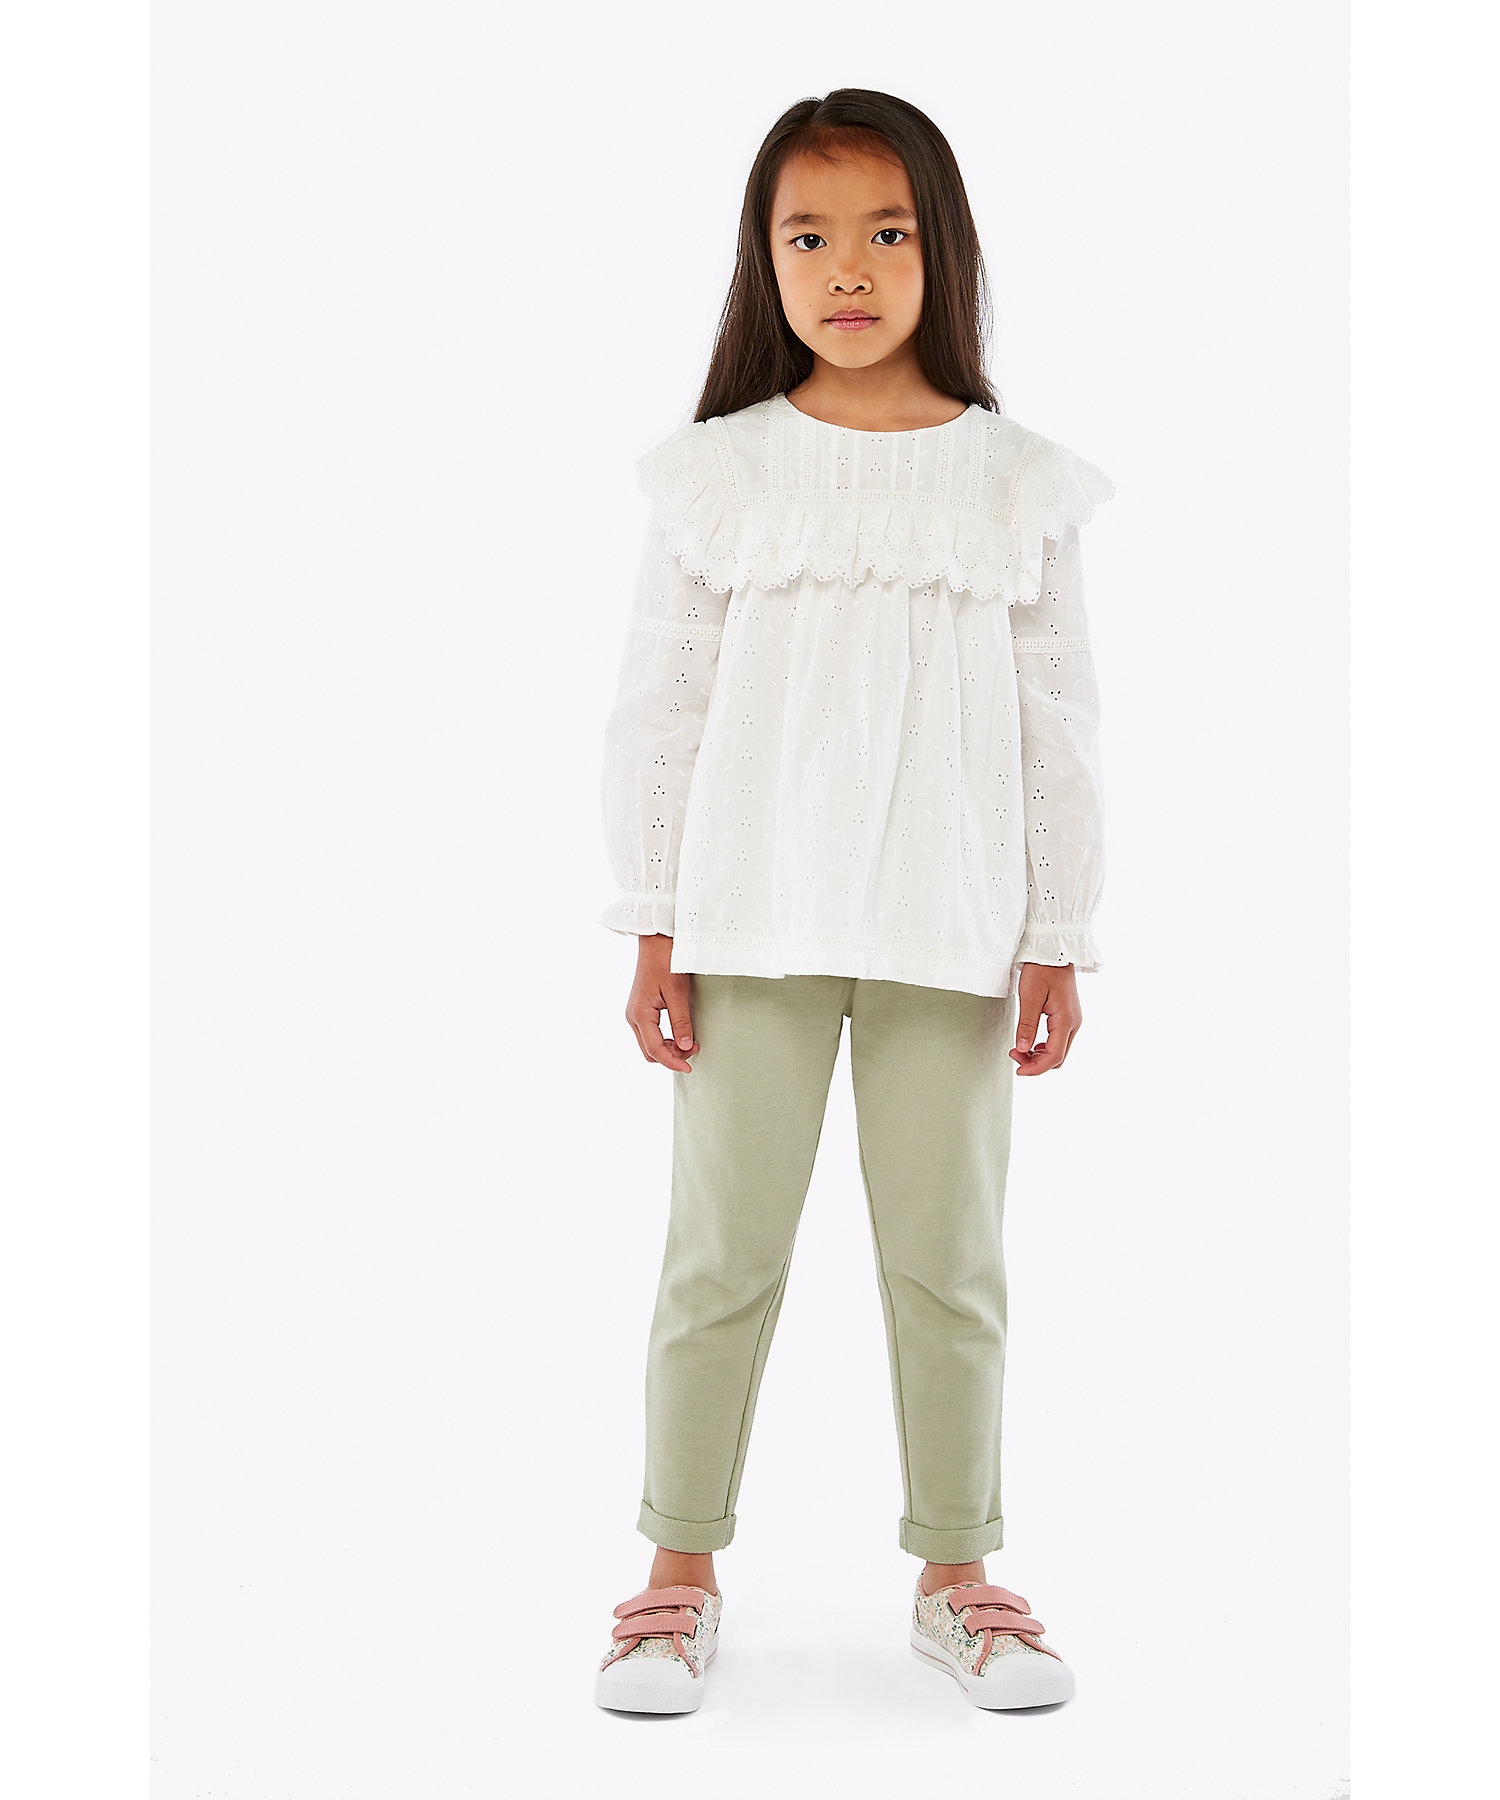 Mothercare | Girls Full Sleeves Schiffli Top Lace And Frill Detail - White